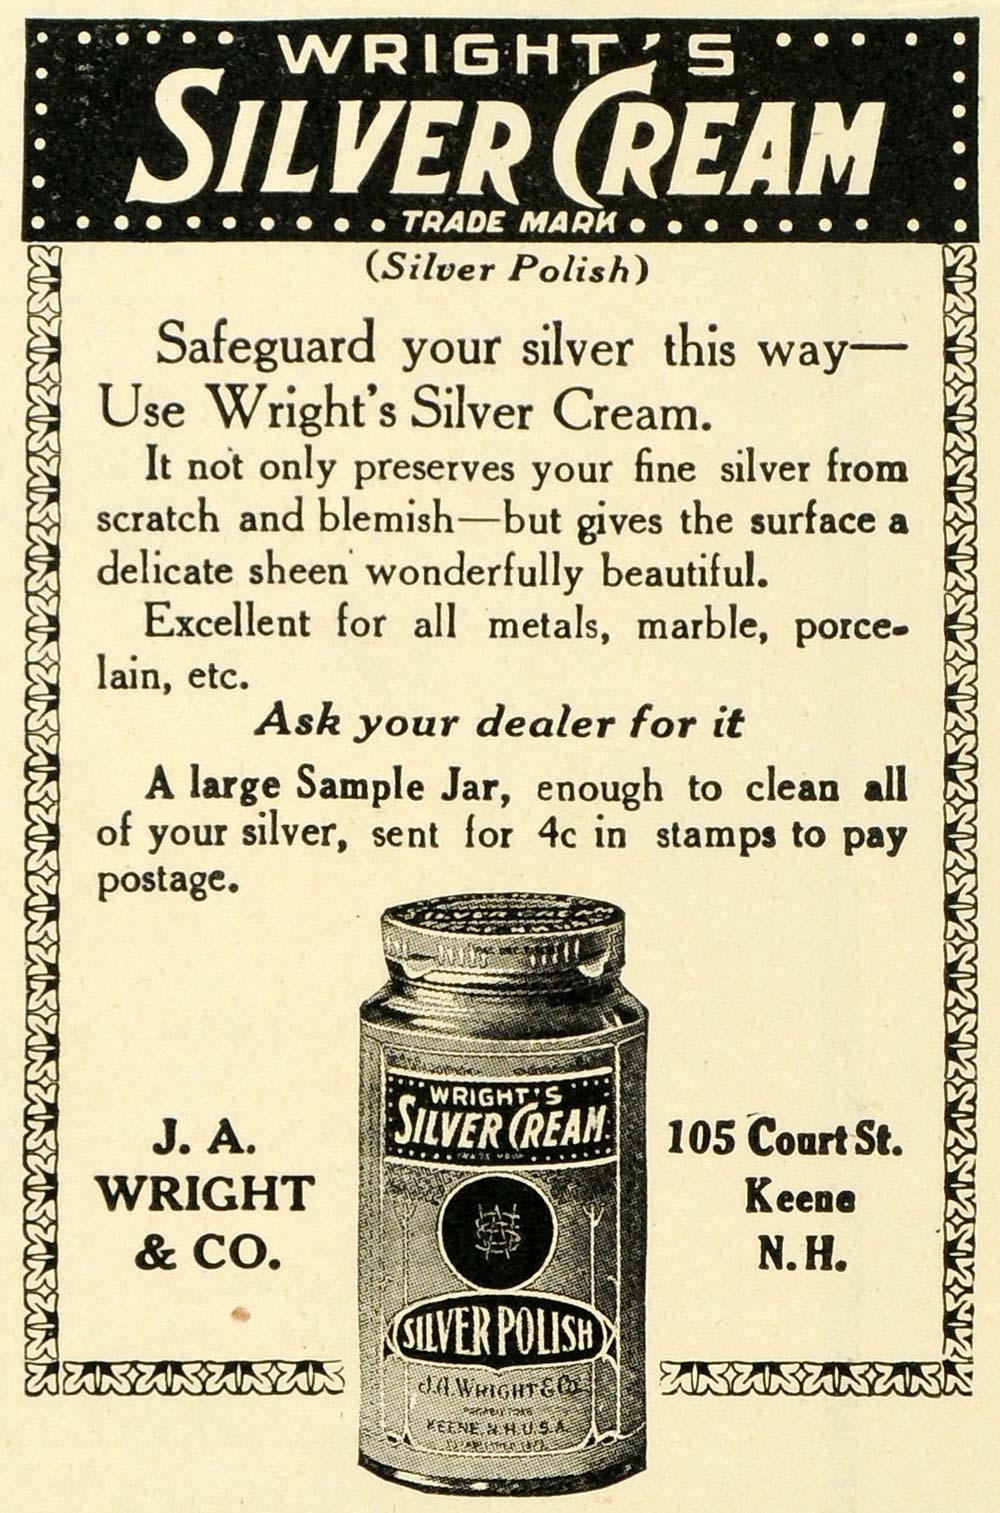 How to clean your Silver with Wright's Silver Cream 